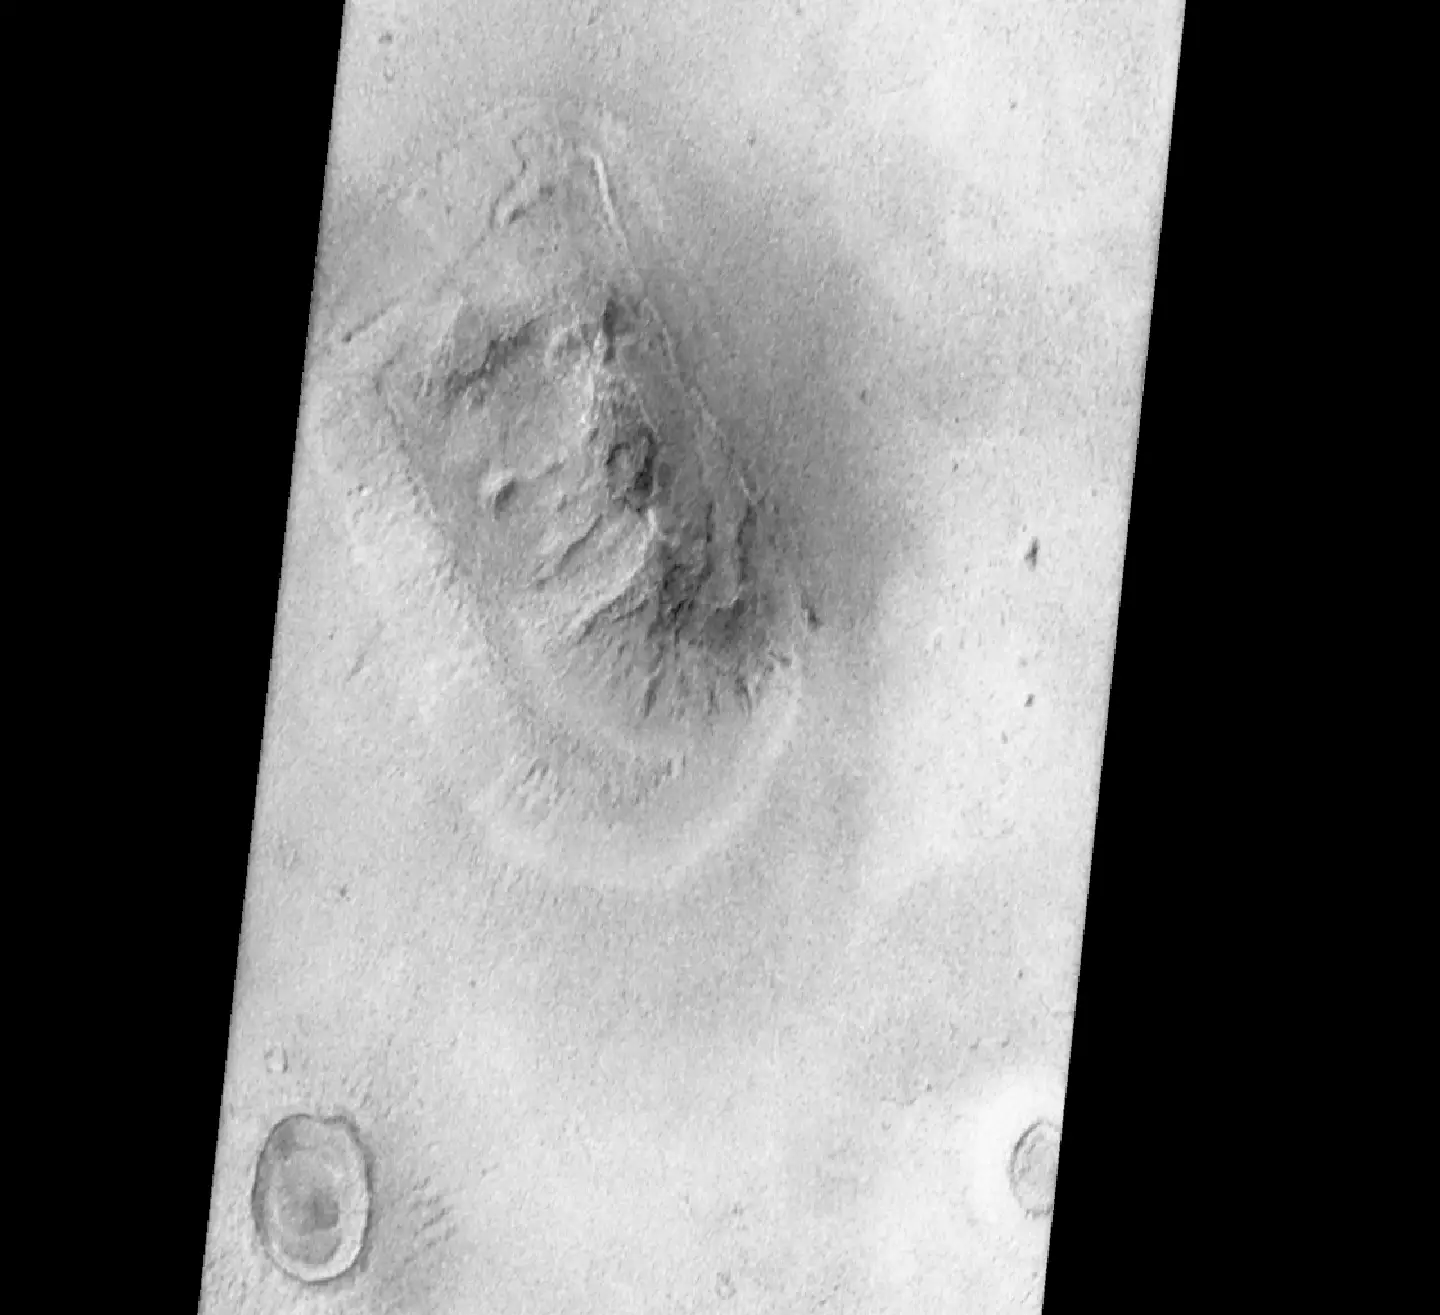 47 years to the day (25 July), the 'Face on Mars' was born.